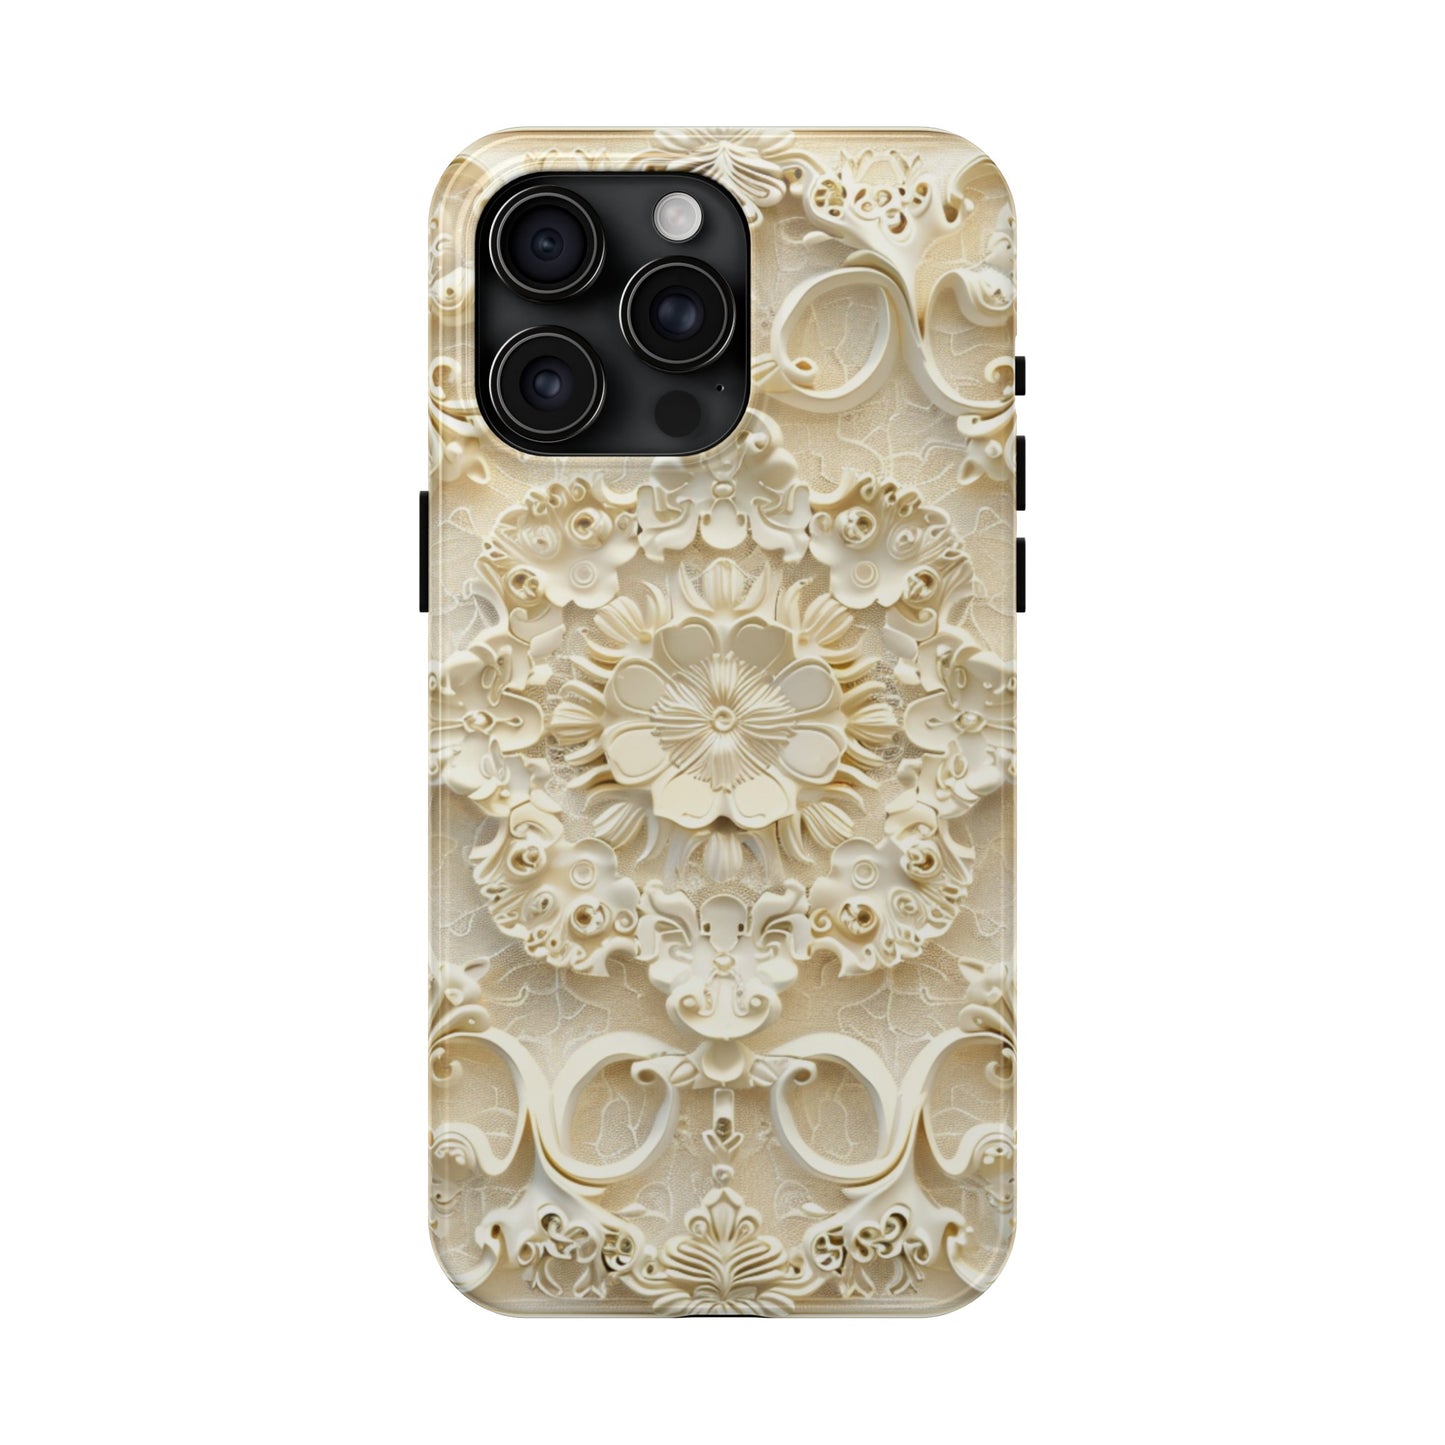 3D Vintage lace pattern in soft ivory and gold-